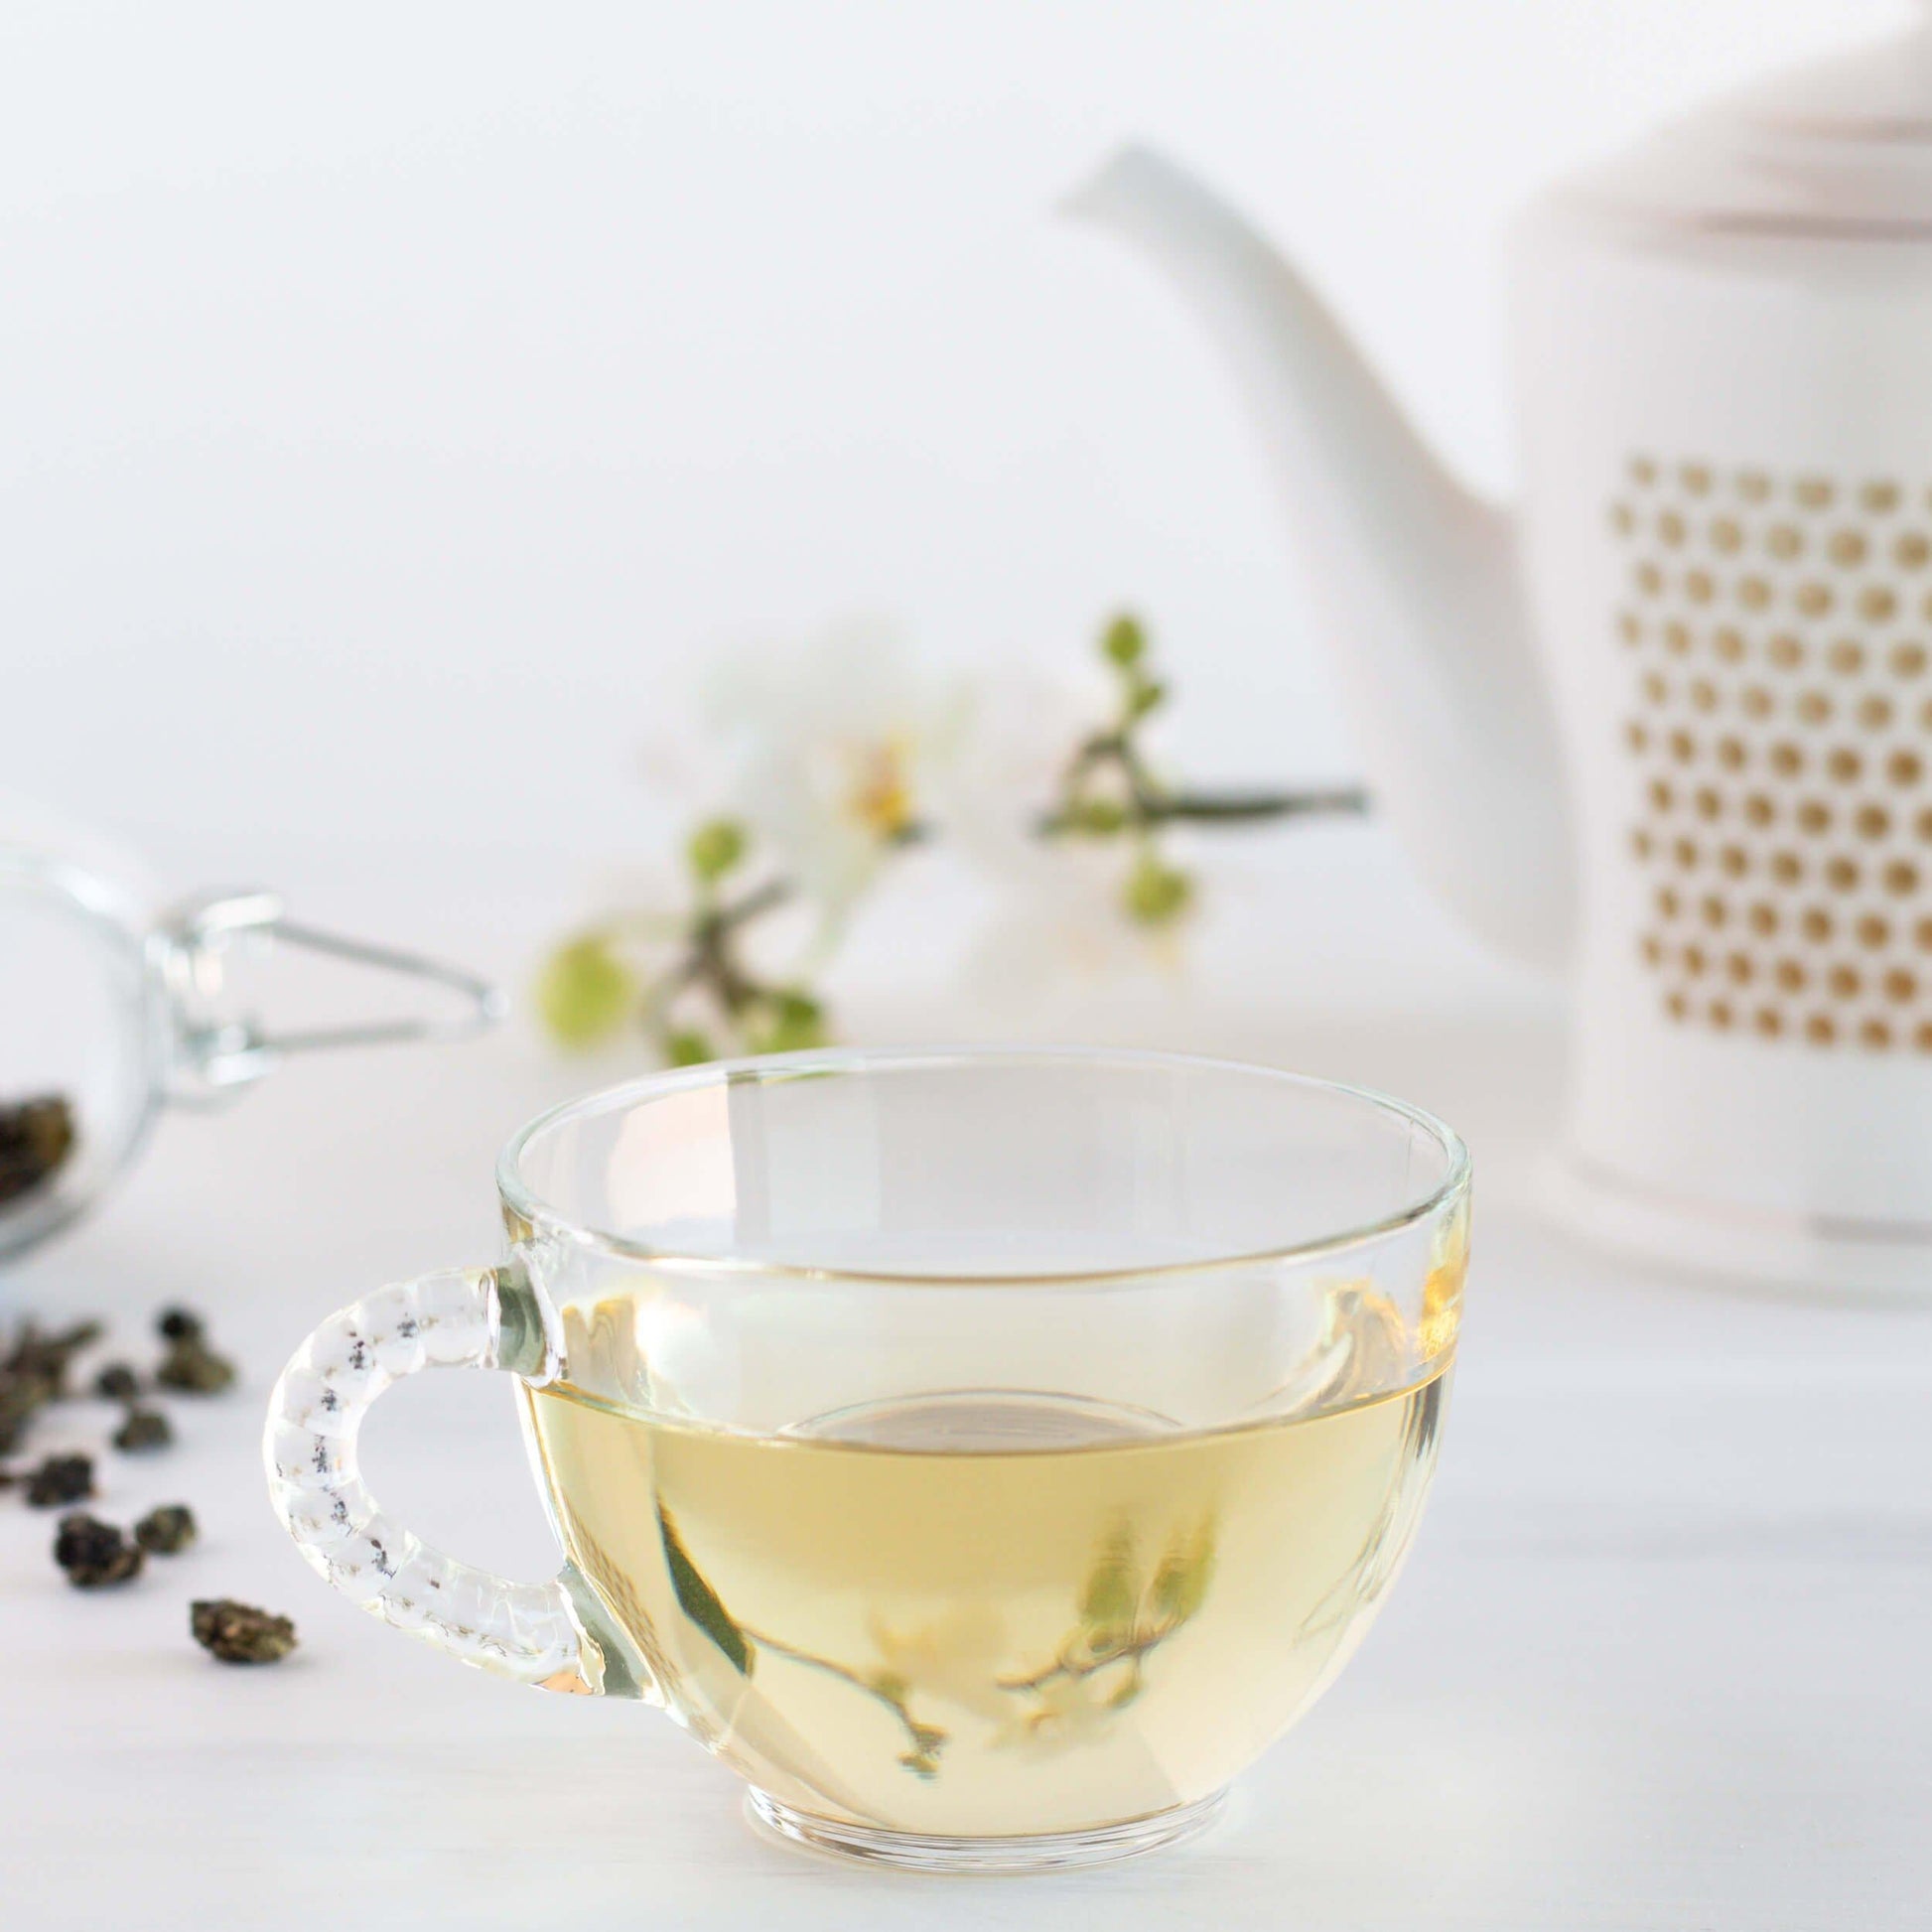 Fine Ti Kuan Yin Organic Oolong Tea shown as brewed tea in a glass teacup with a white and gold teapot in the background